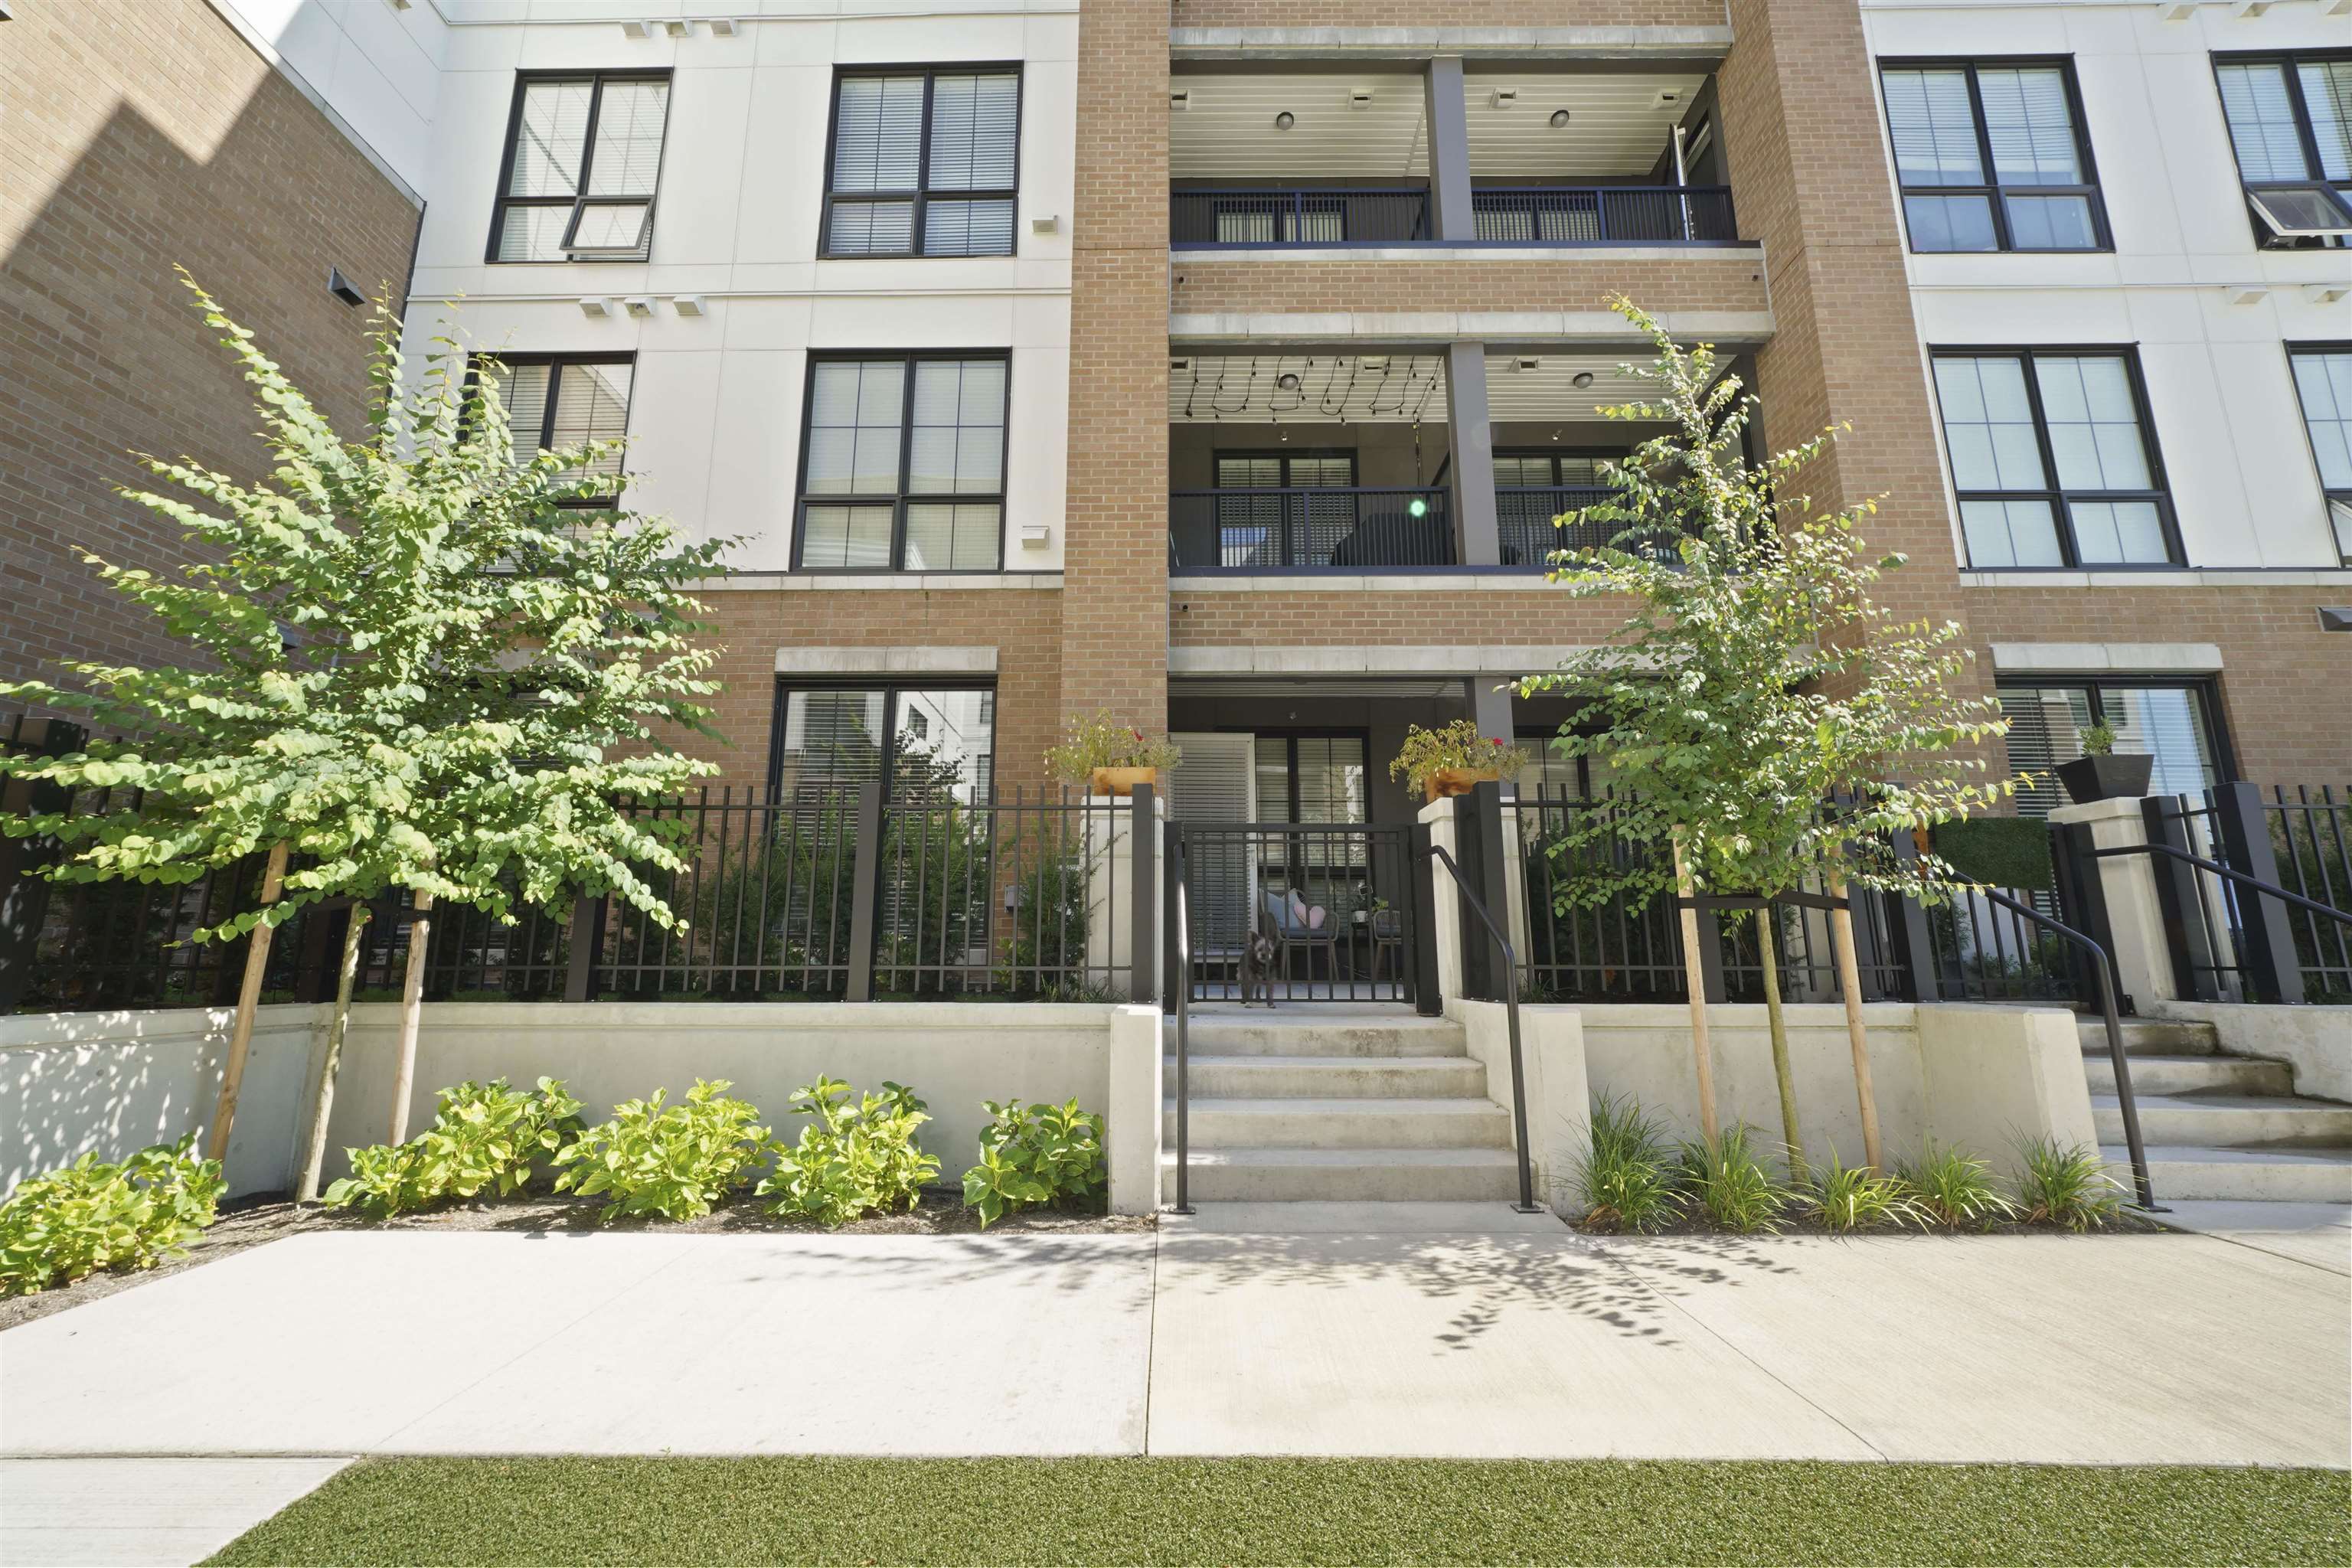 Willoughby Heights Apartment/Condo for sale:  2 bedroom 938 sq.ft. (Listed 2022-11-25)